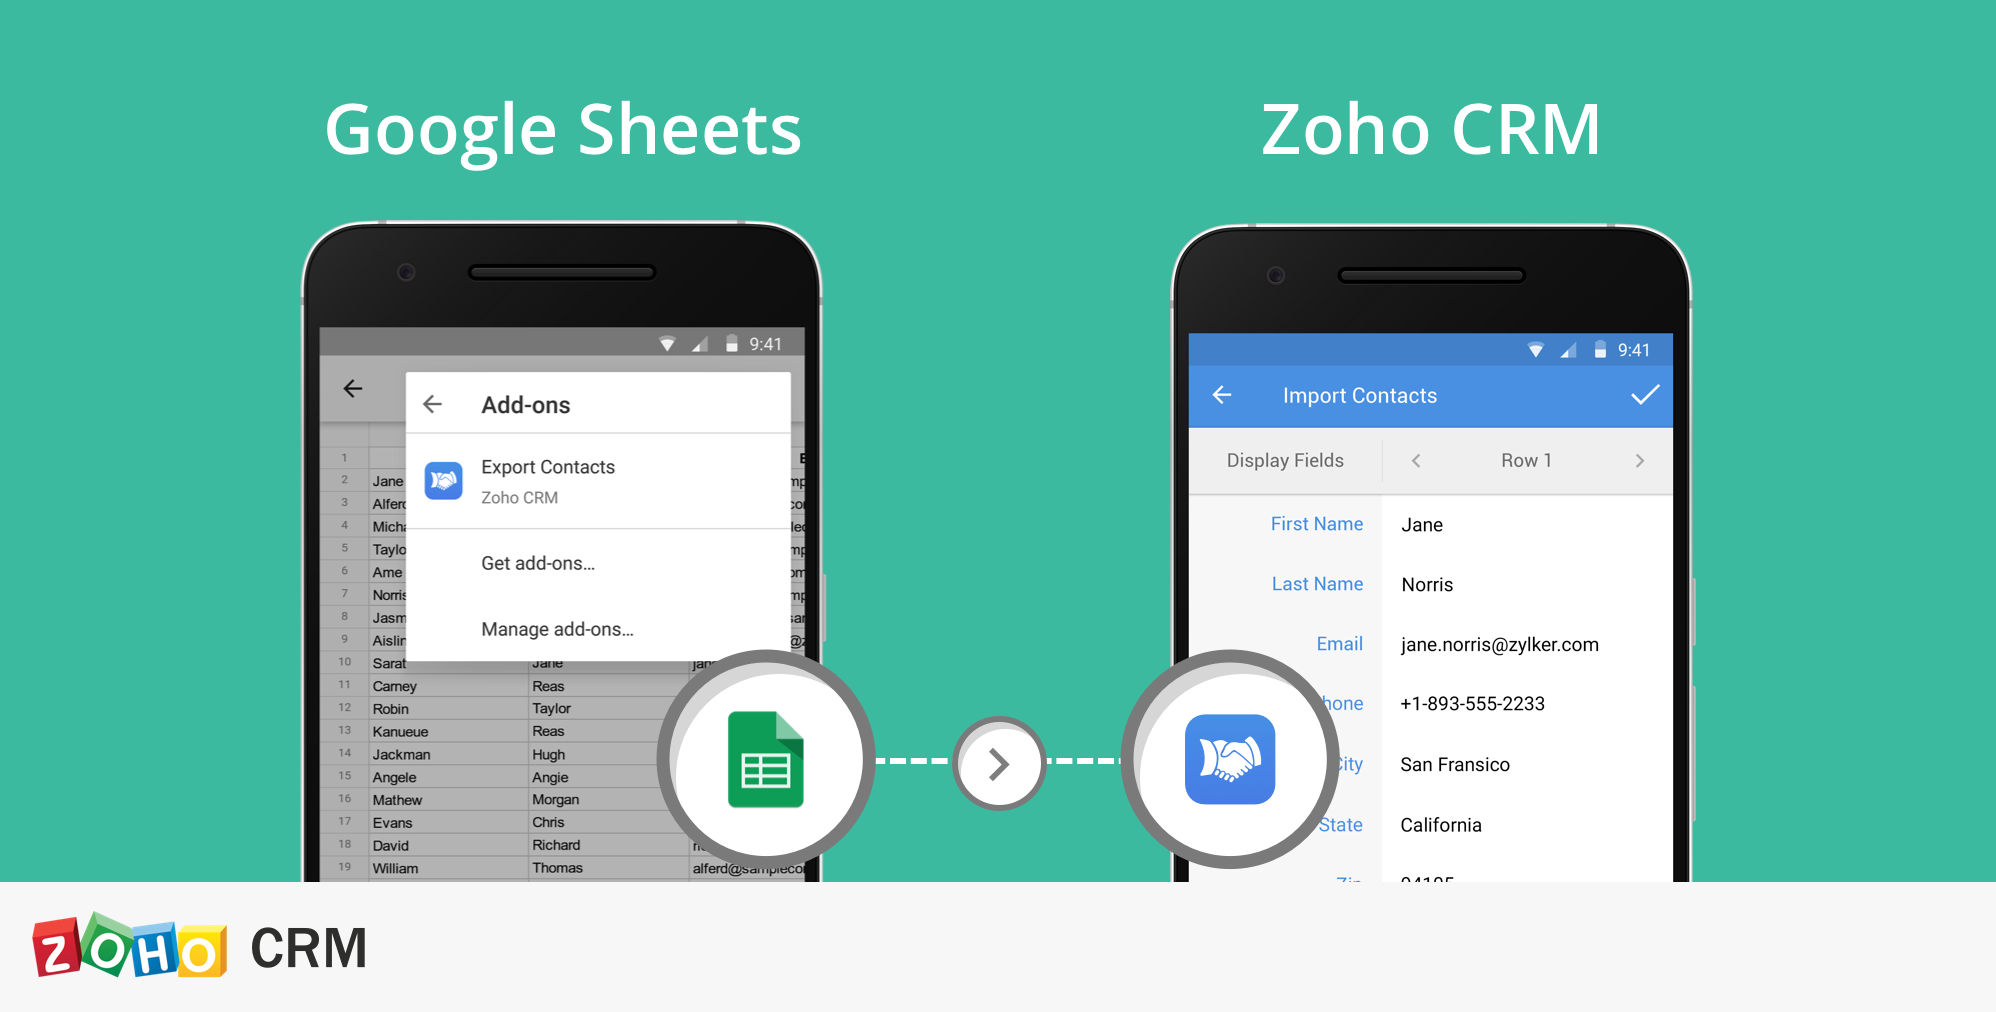 Zoho CRM integration with Google Sheets